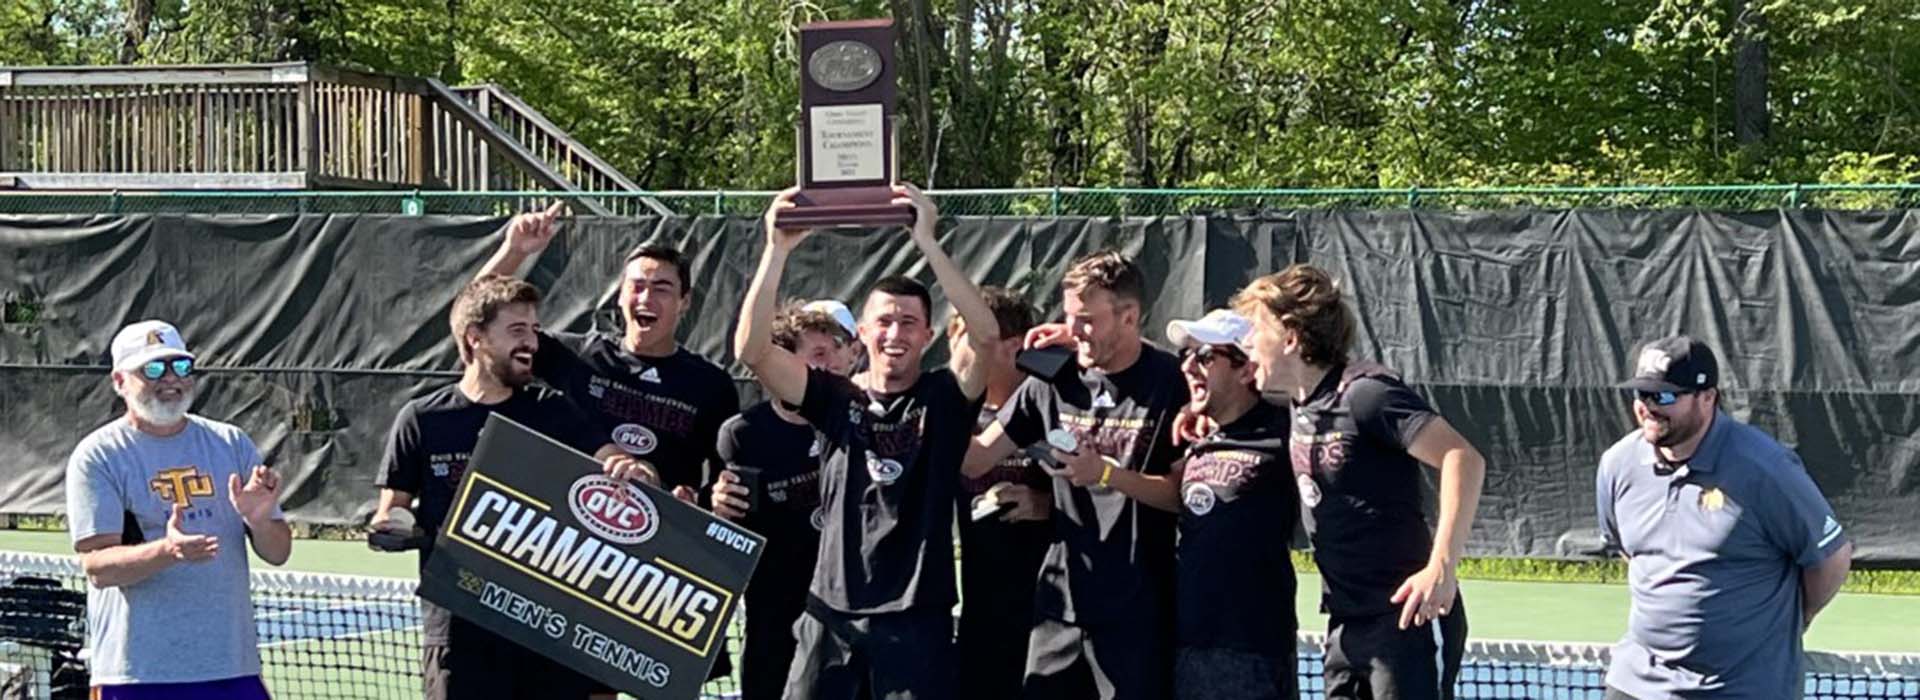 Golden Eagle tennis claims 2022 OVC Tournament title with 4-1 win over top-seed Belmont